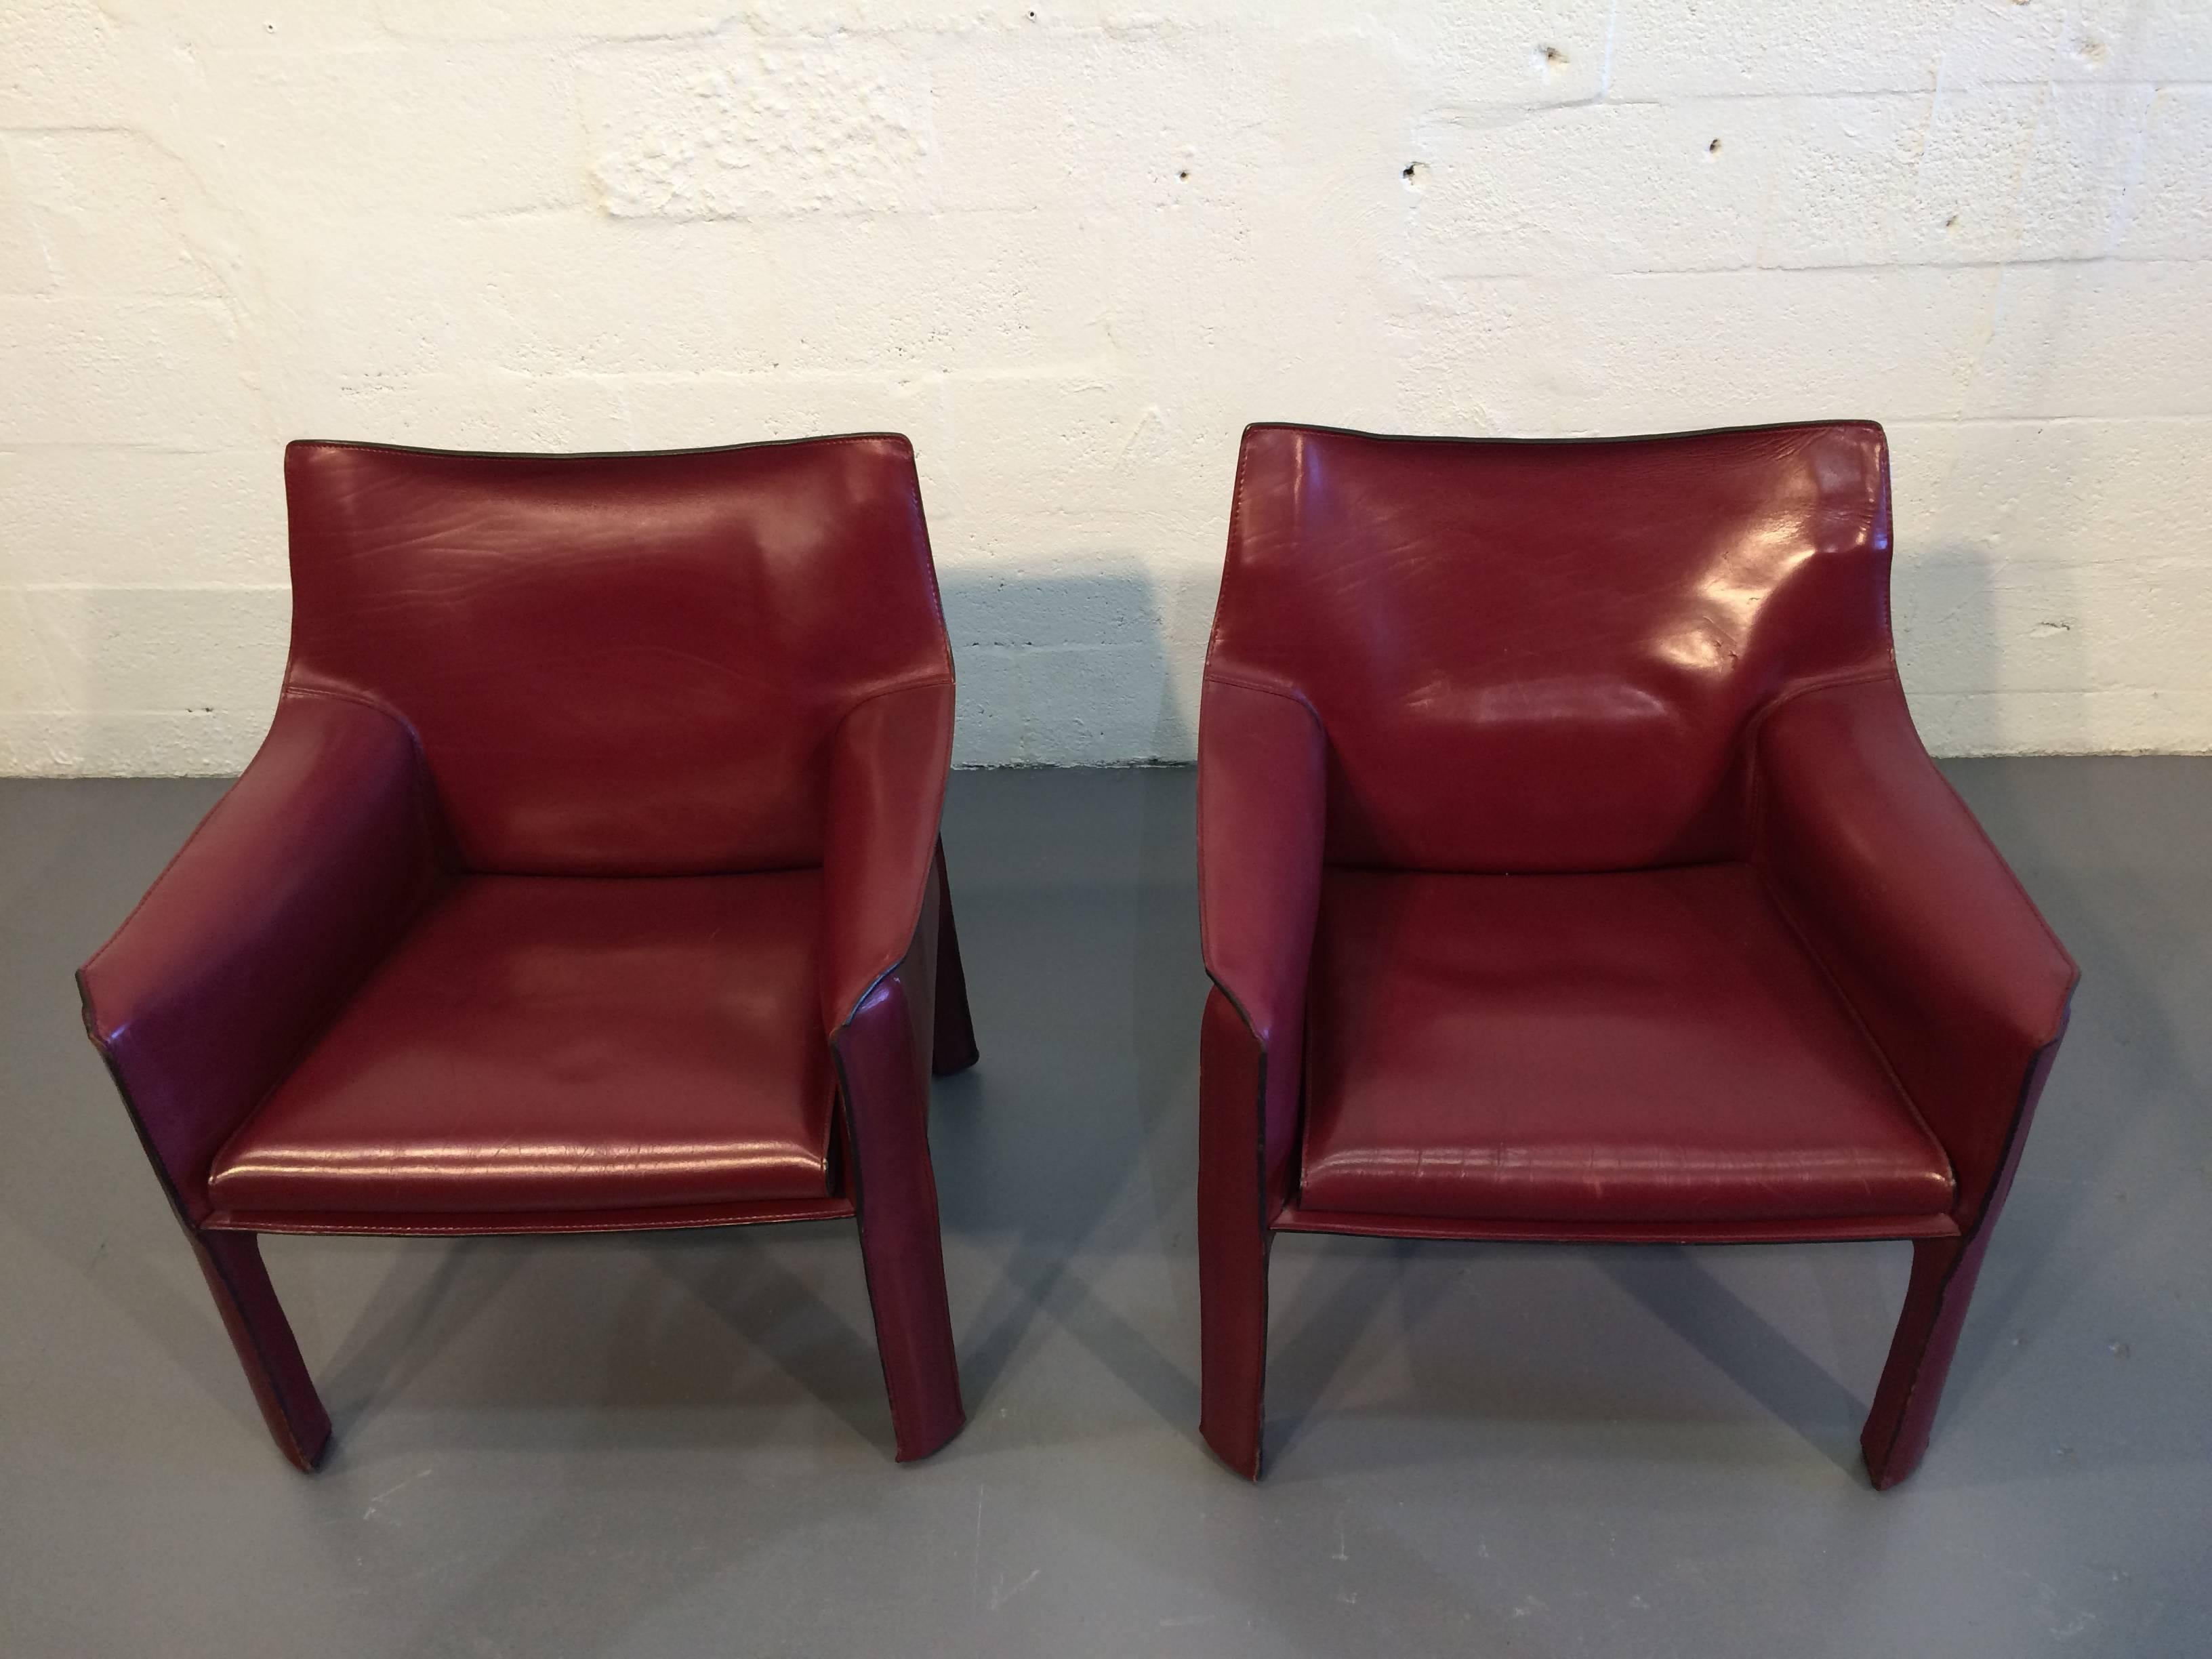 Great Mario Bellini saddle leather lounge chairs made and signed by Cassina.
The leather is a Burgundy color.